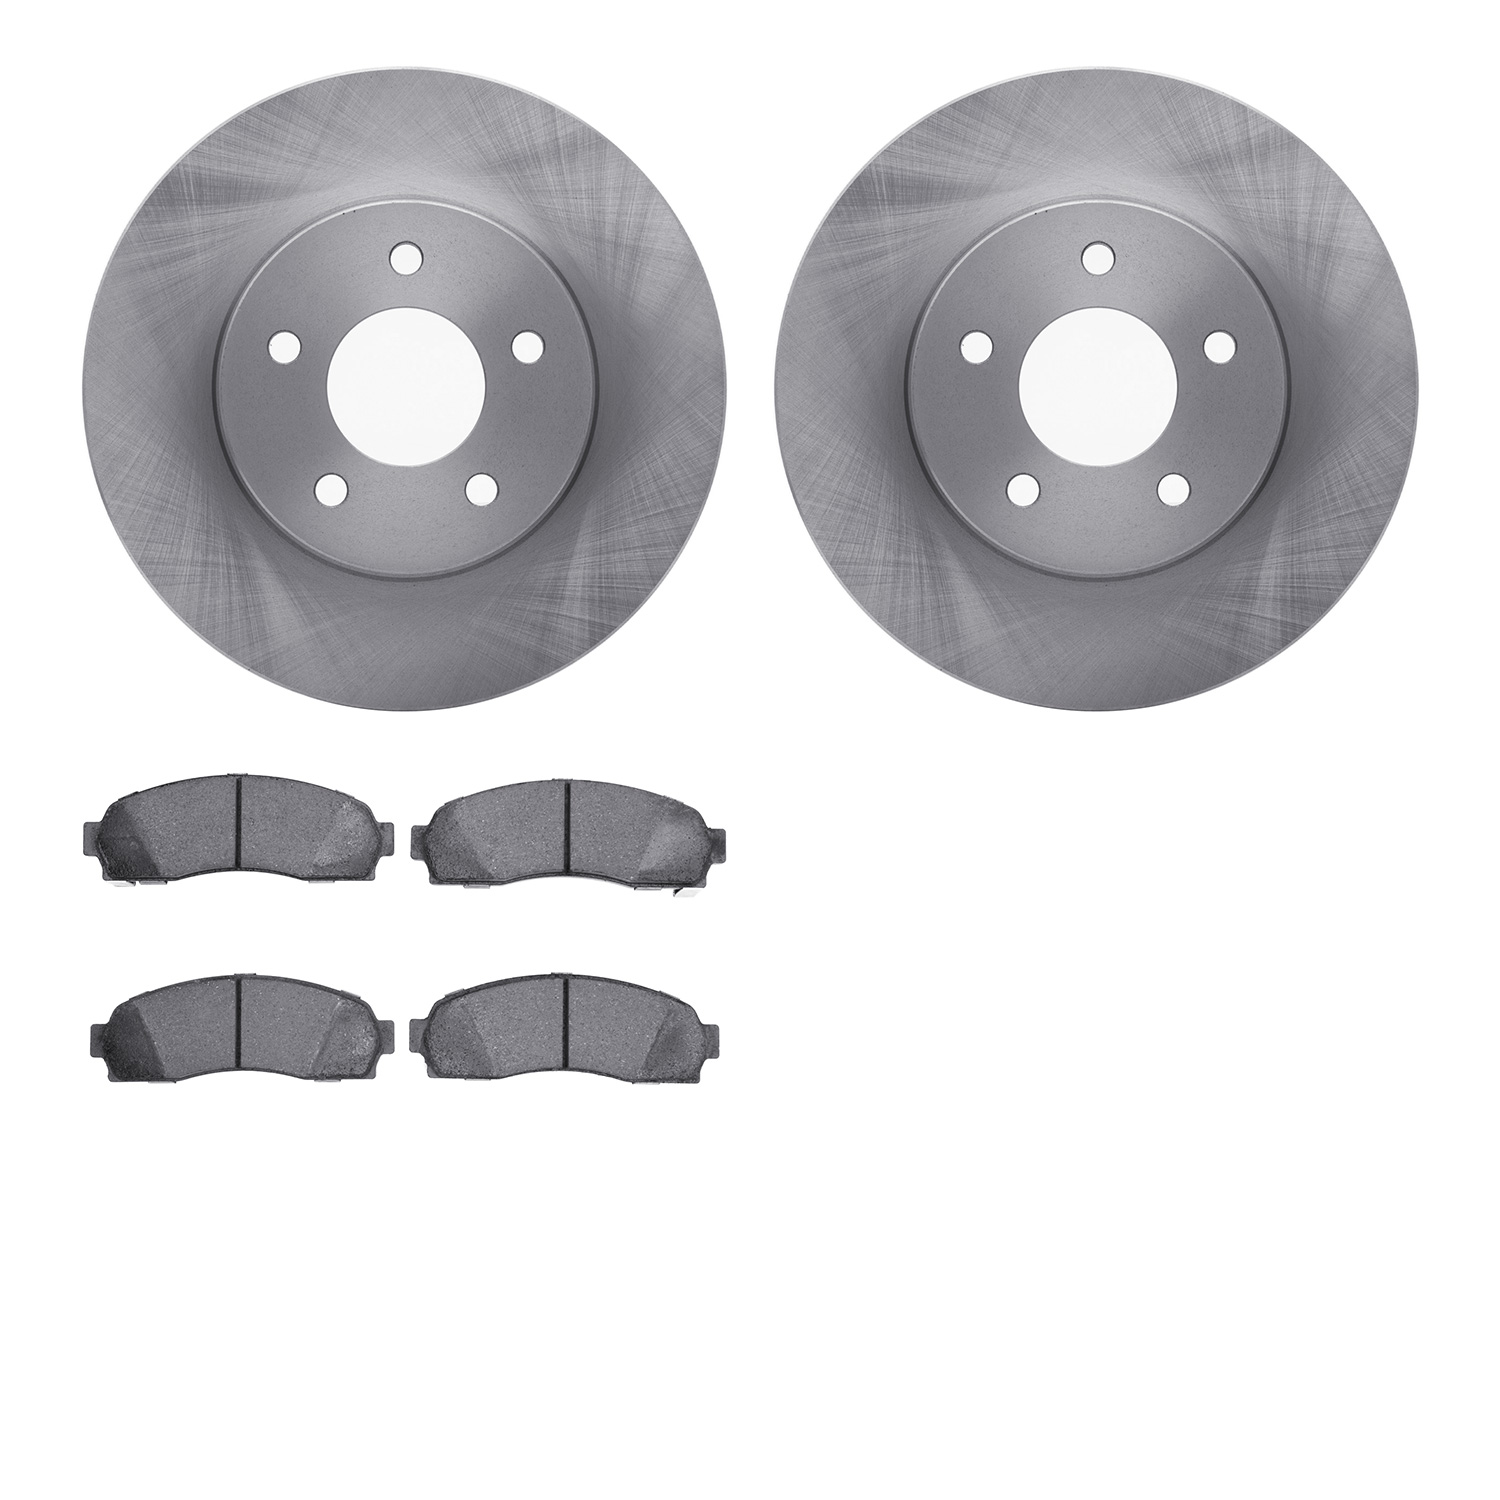 6402-47034 Brake Rotors with Ultimate-Duty Brake Pads, 2002-2007 GM, Position: Front